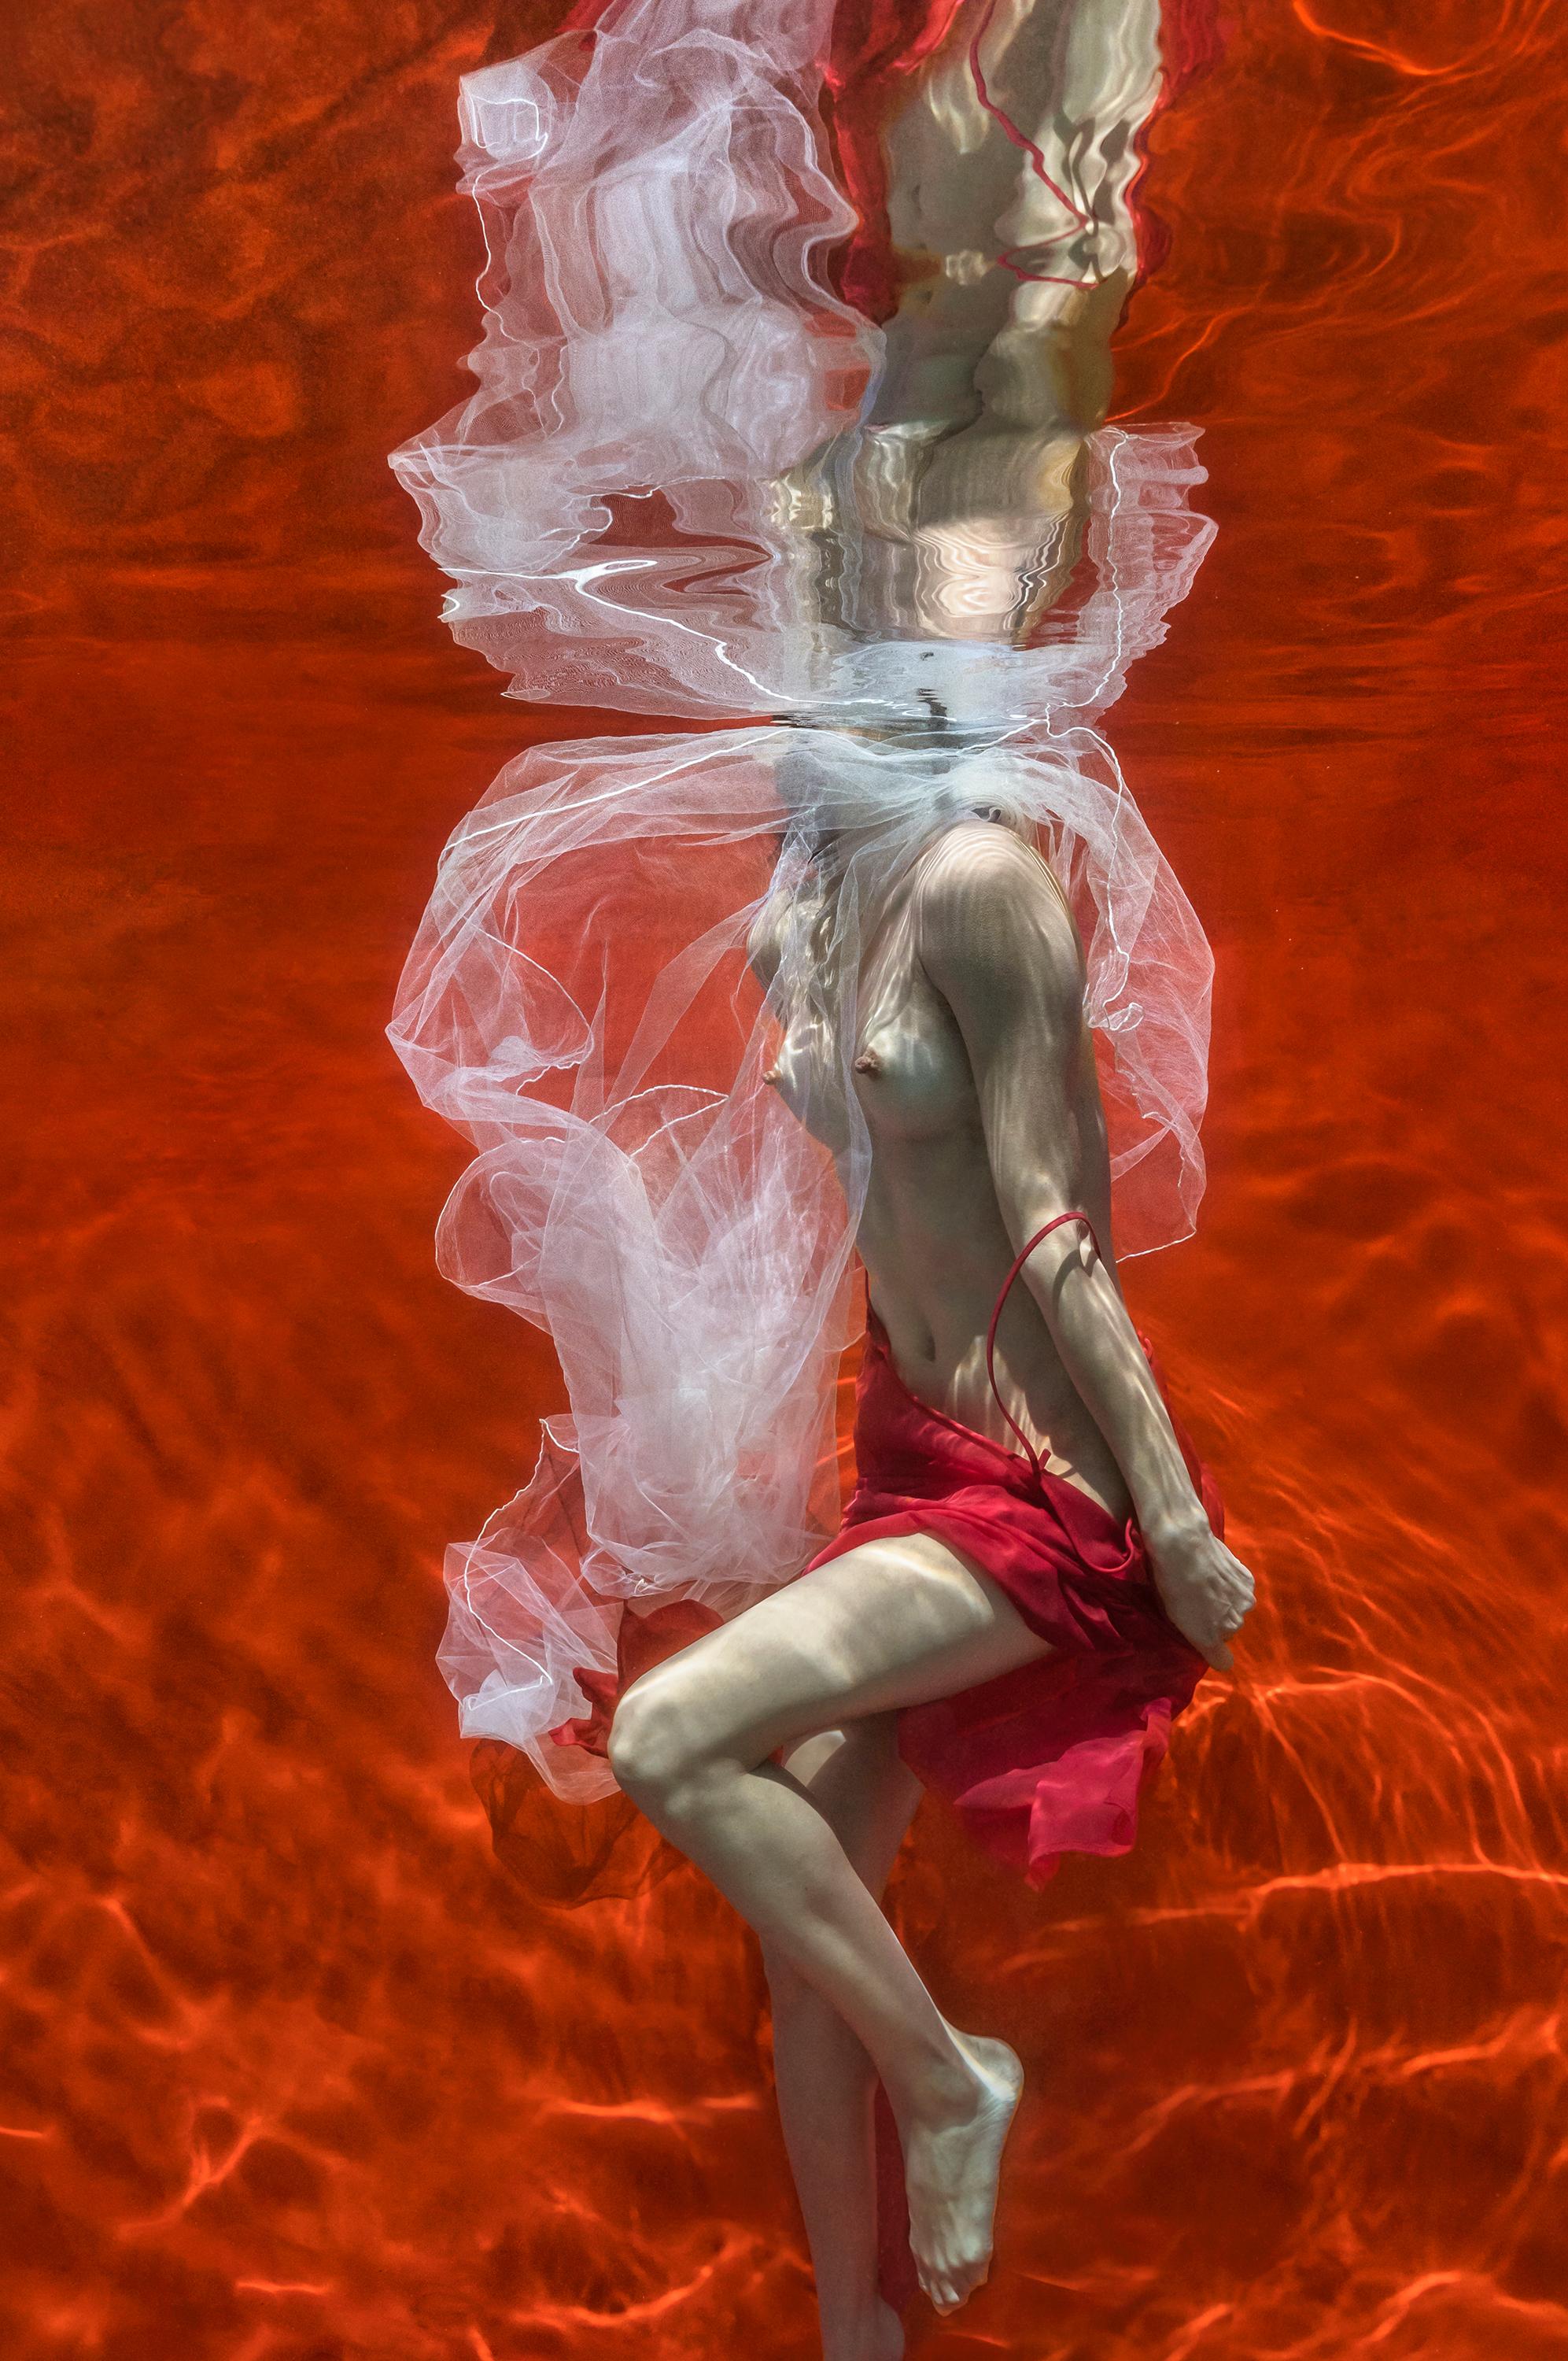 Blood and Milk III - underwater nude photograph - print on paper 35 x 25